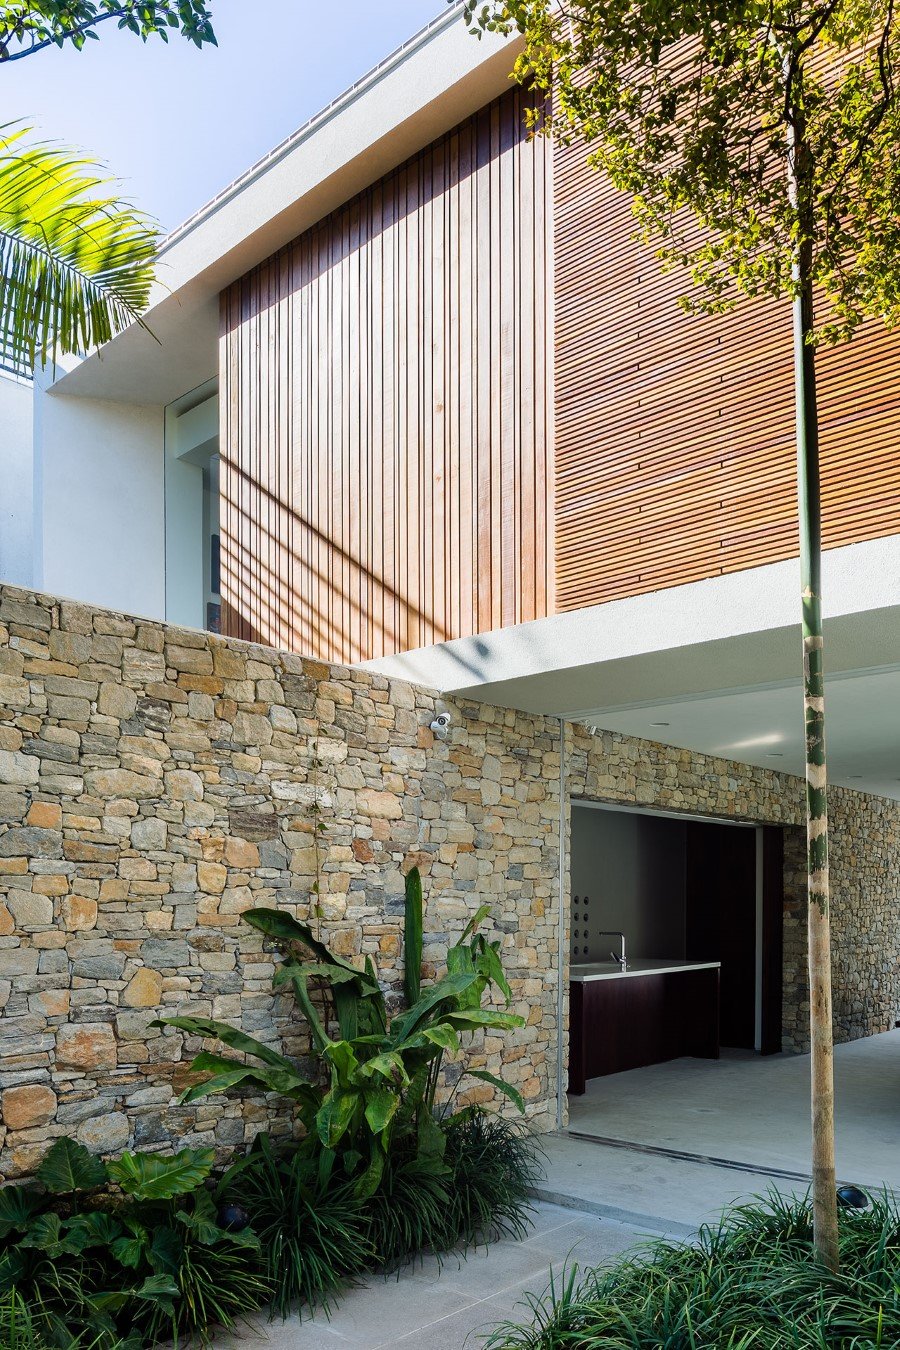 Lara House is a generous and light-filled home in Sao Paulo - by Felipe Hess (2)